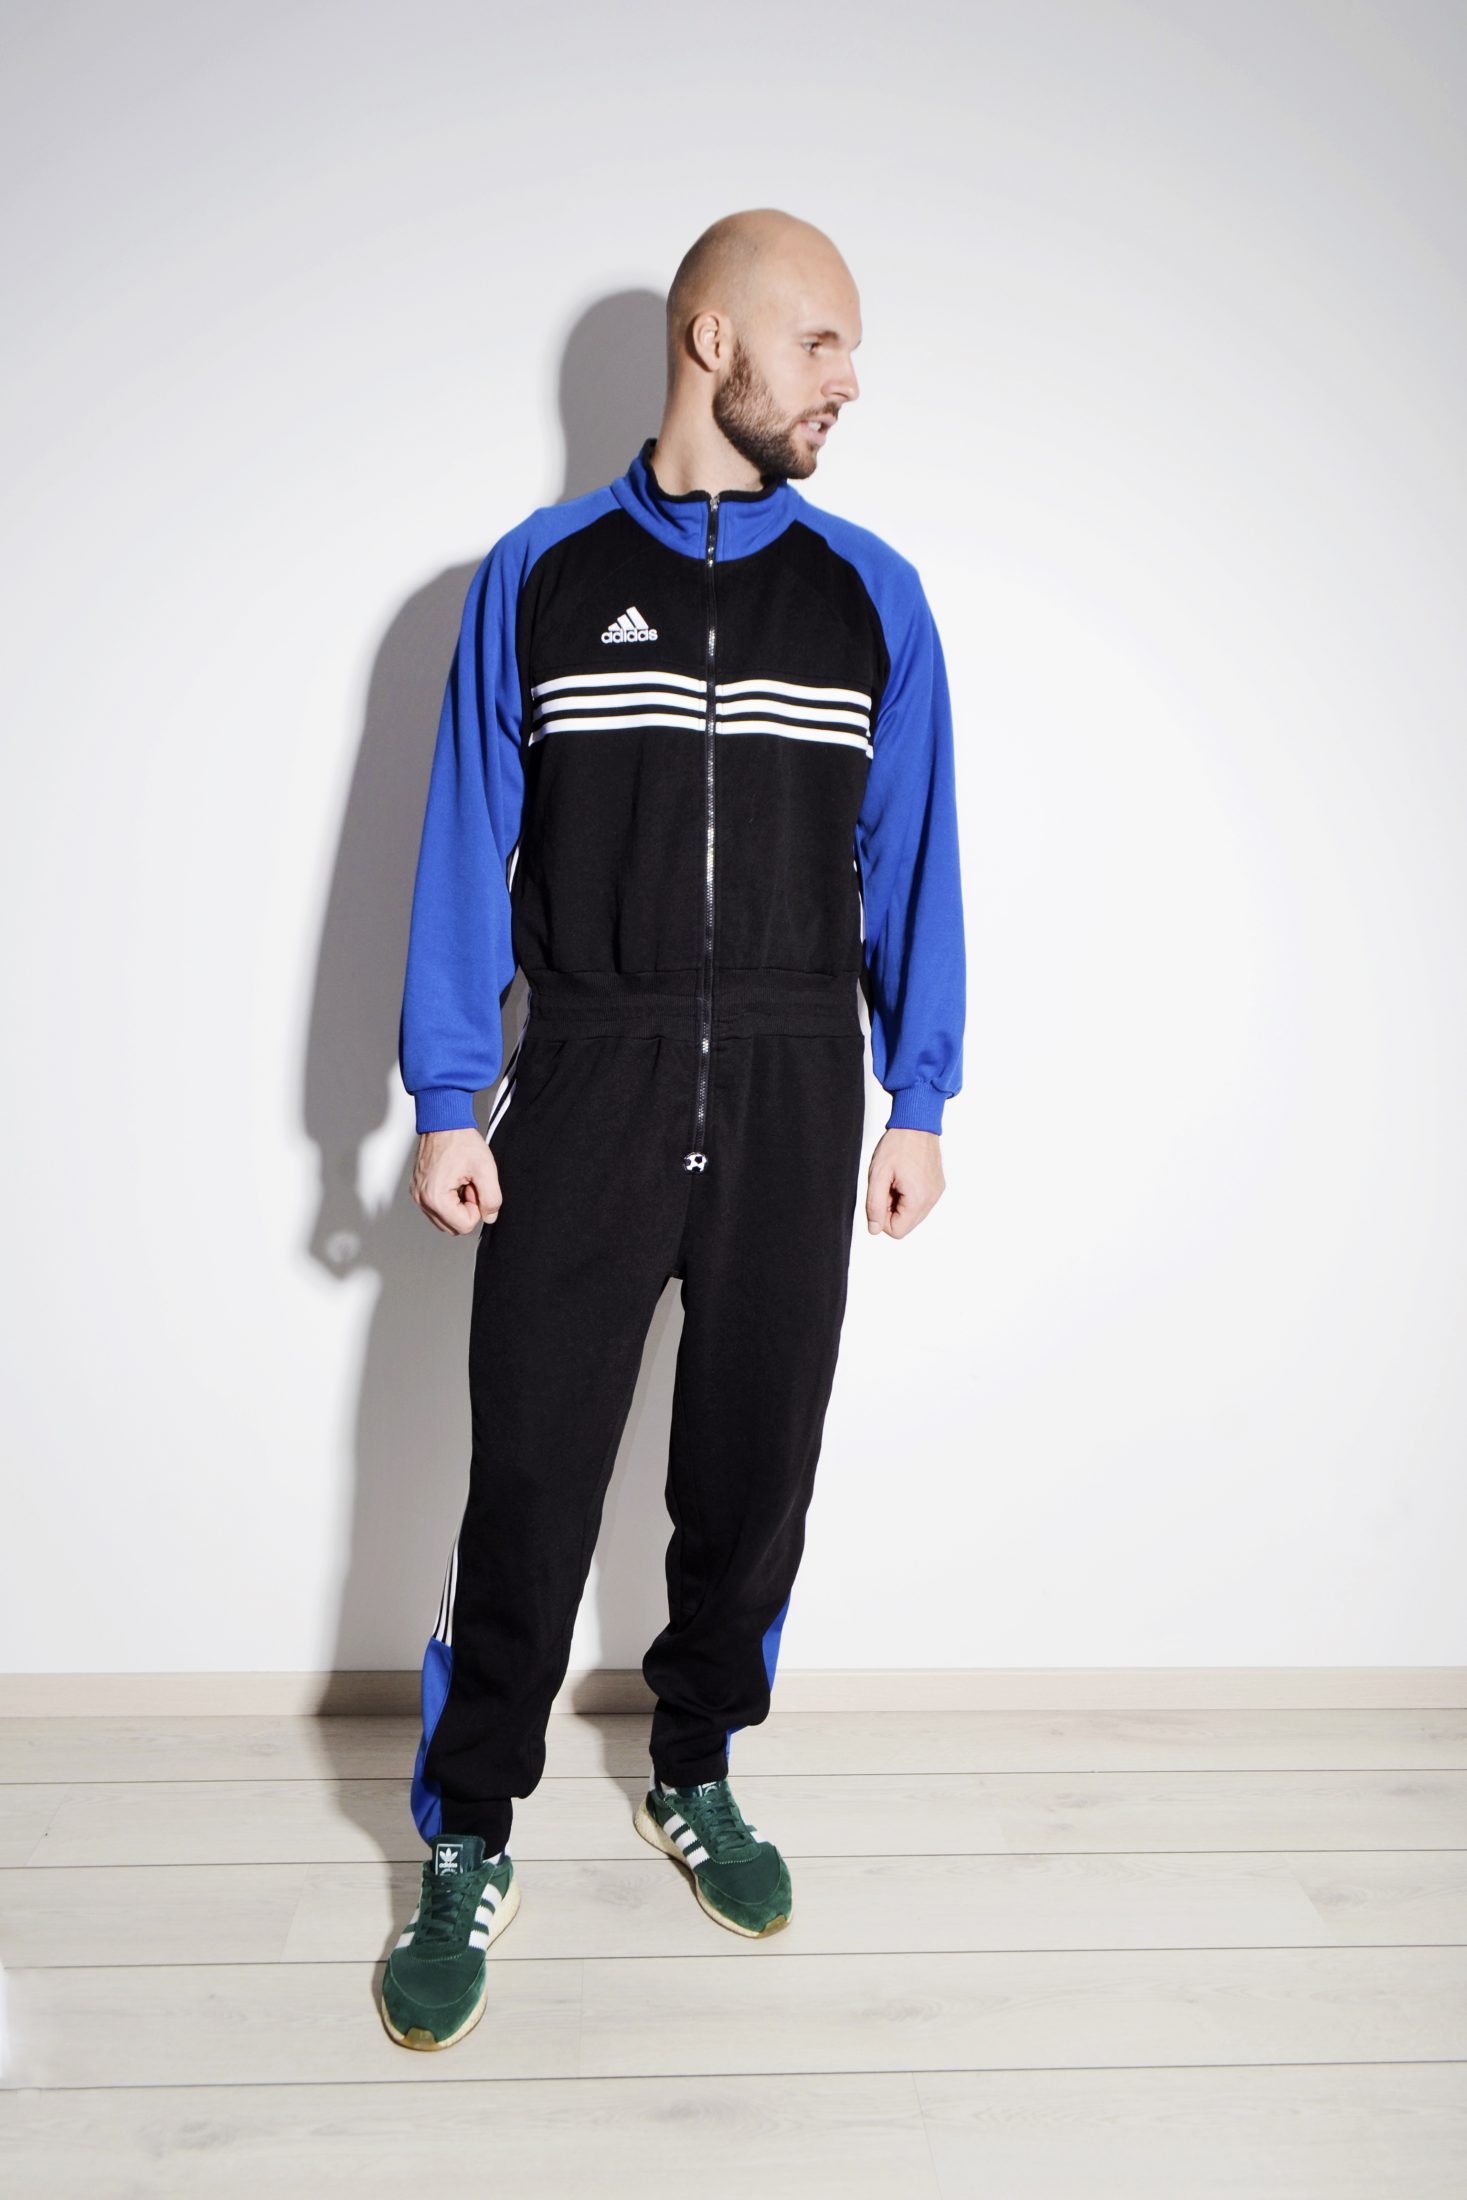 adidas onesies for adults